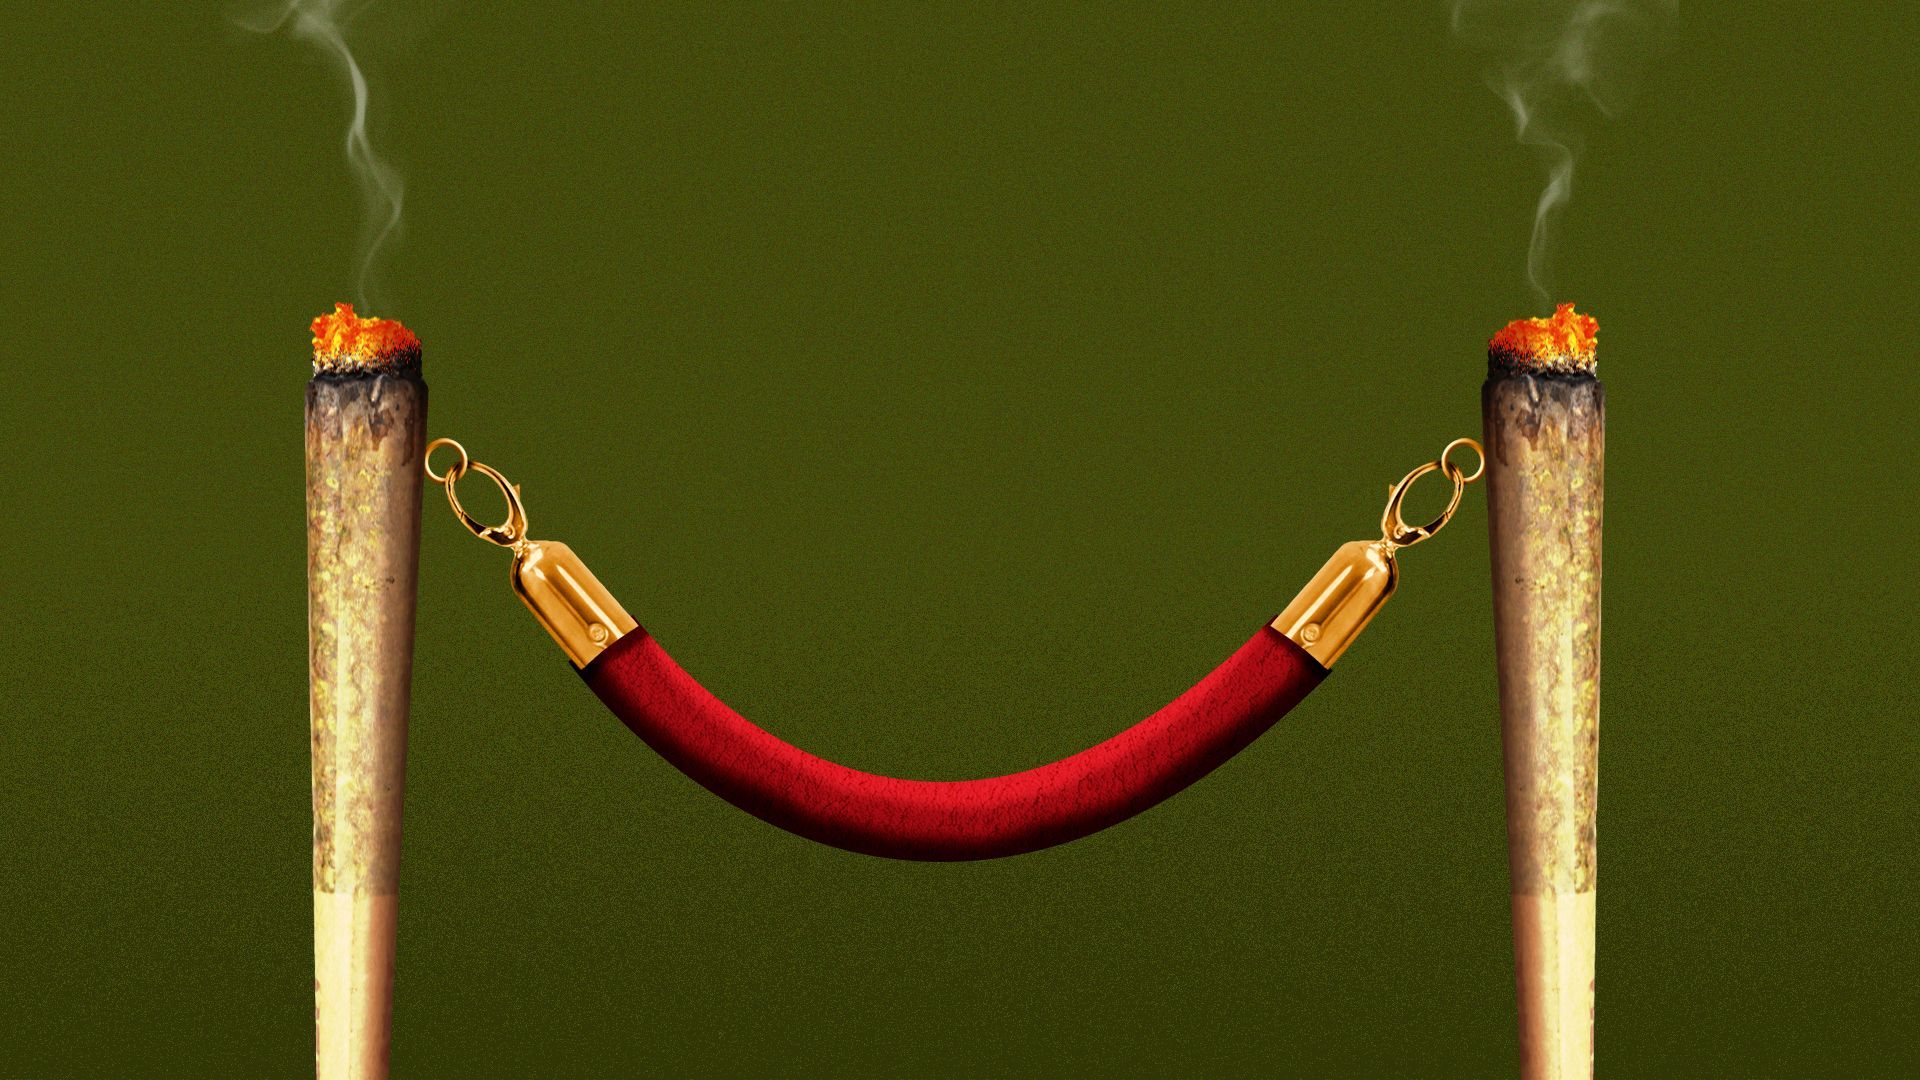 Illustration of a red, velvet rope hooked between two joints.